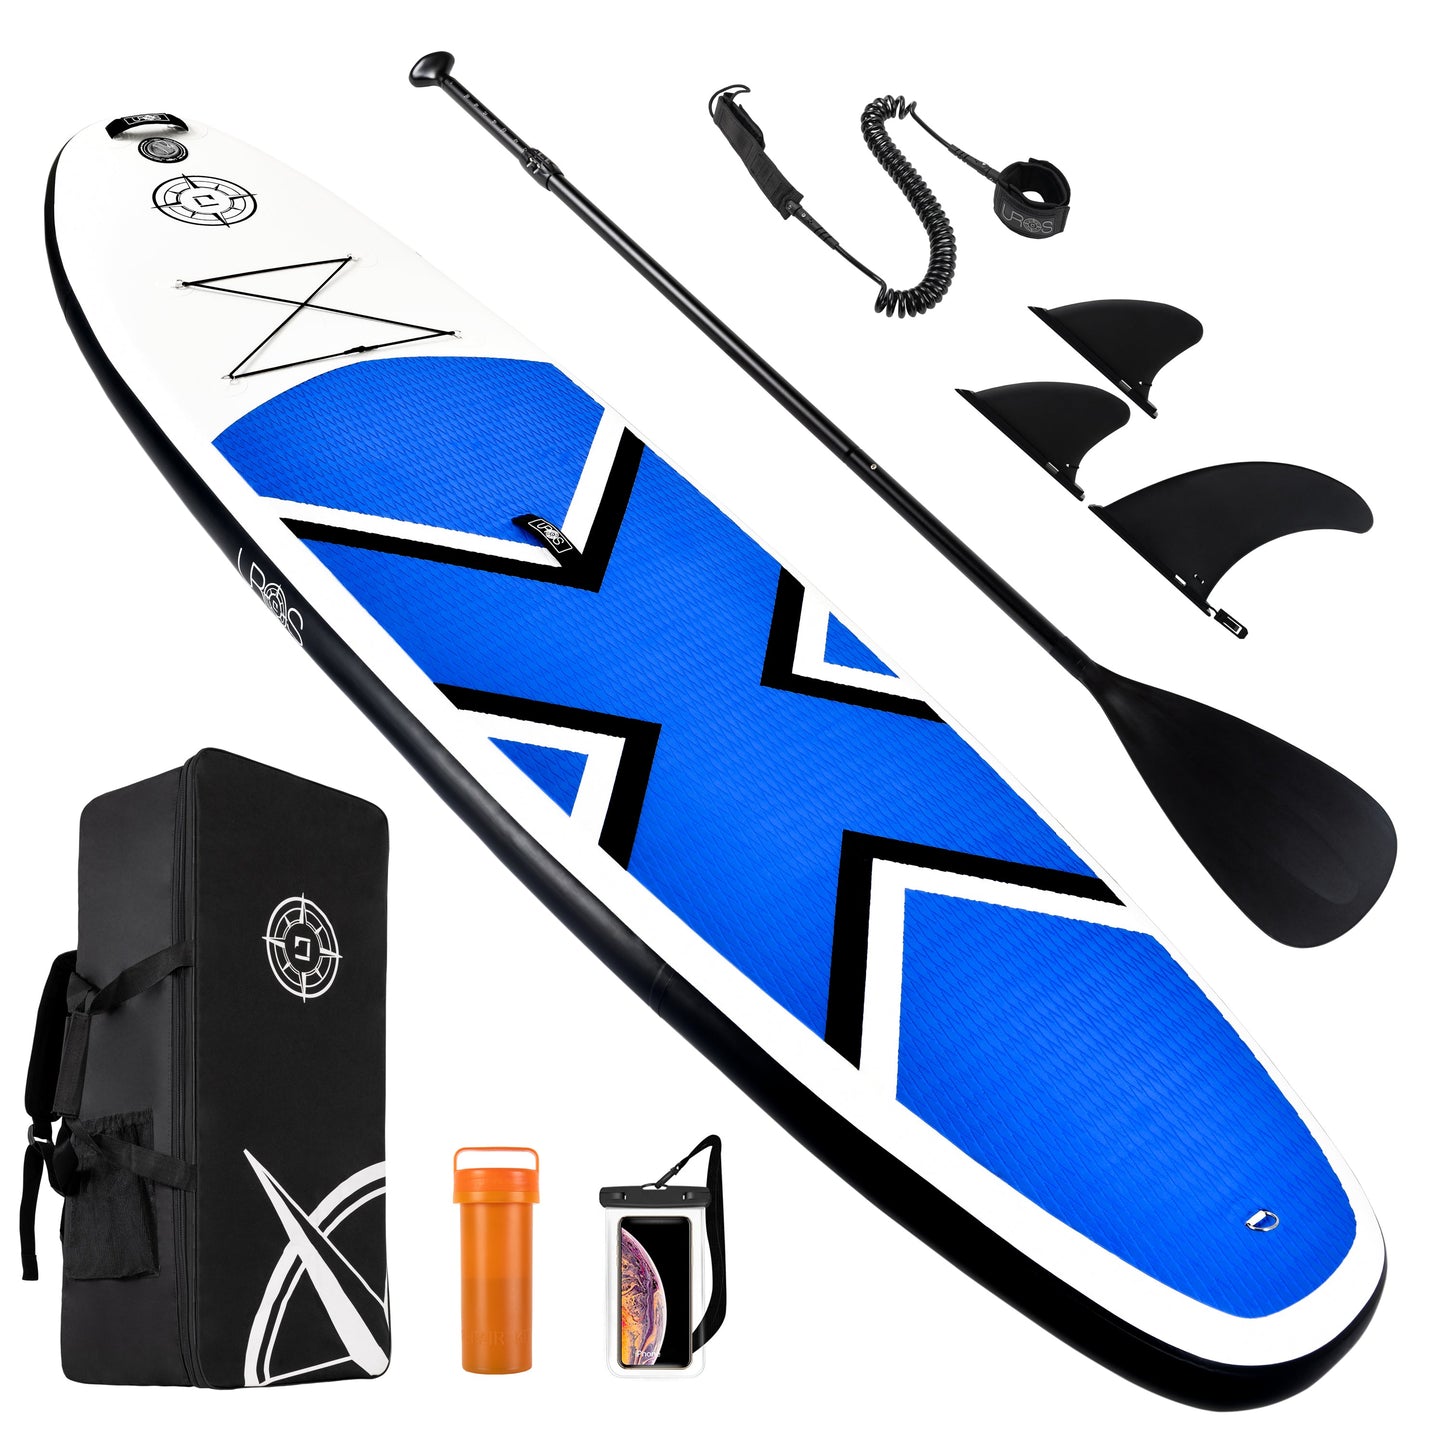 Best Inflatable Paddle Board Complete Kit Overview